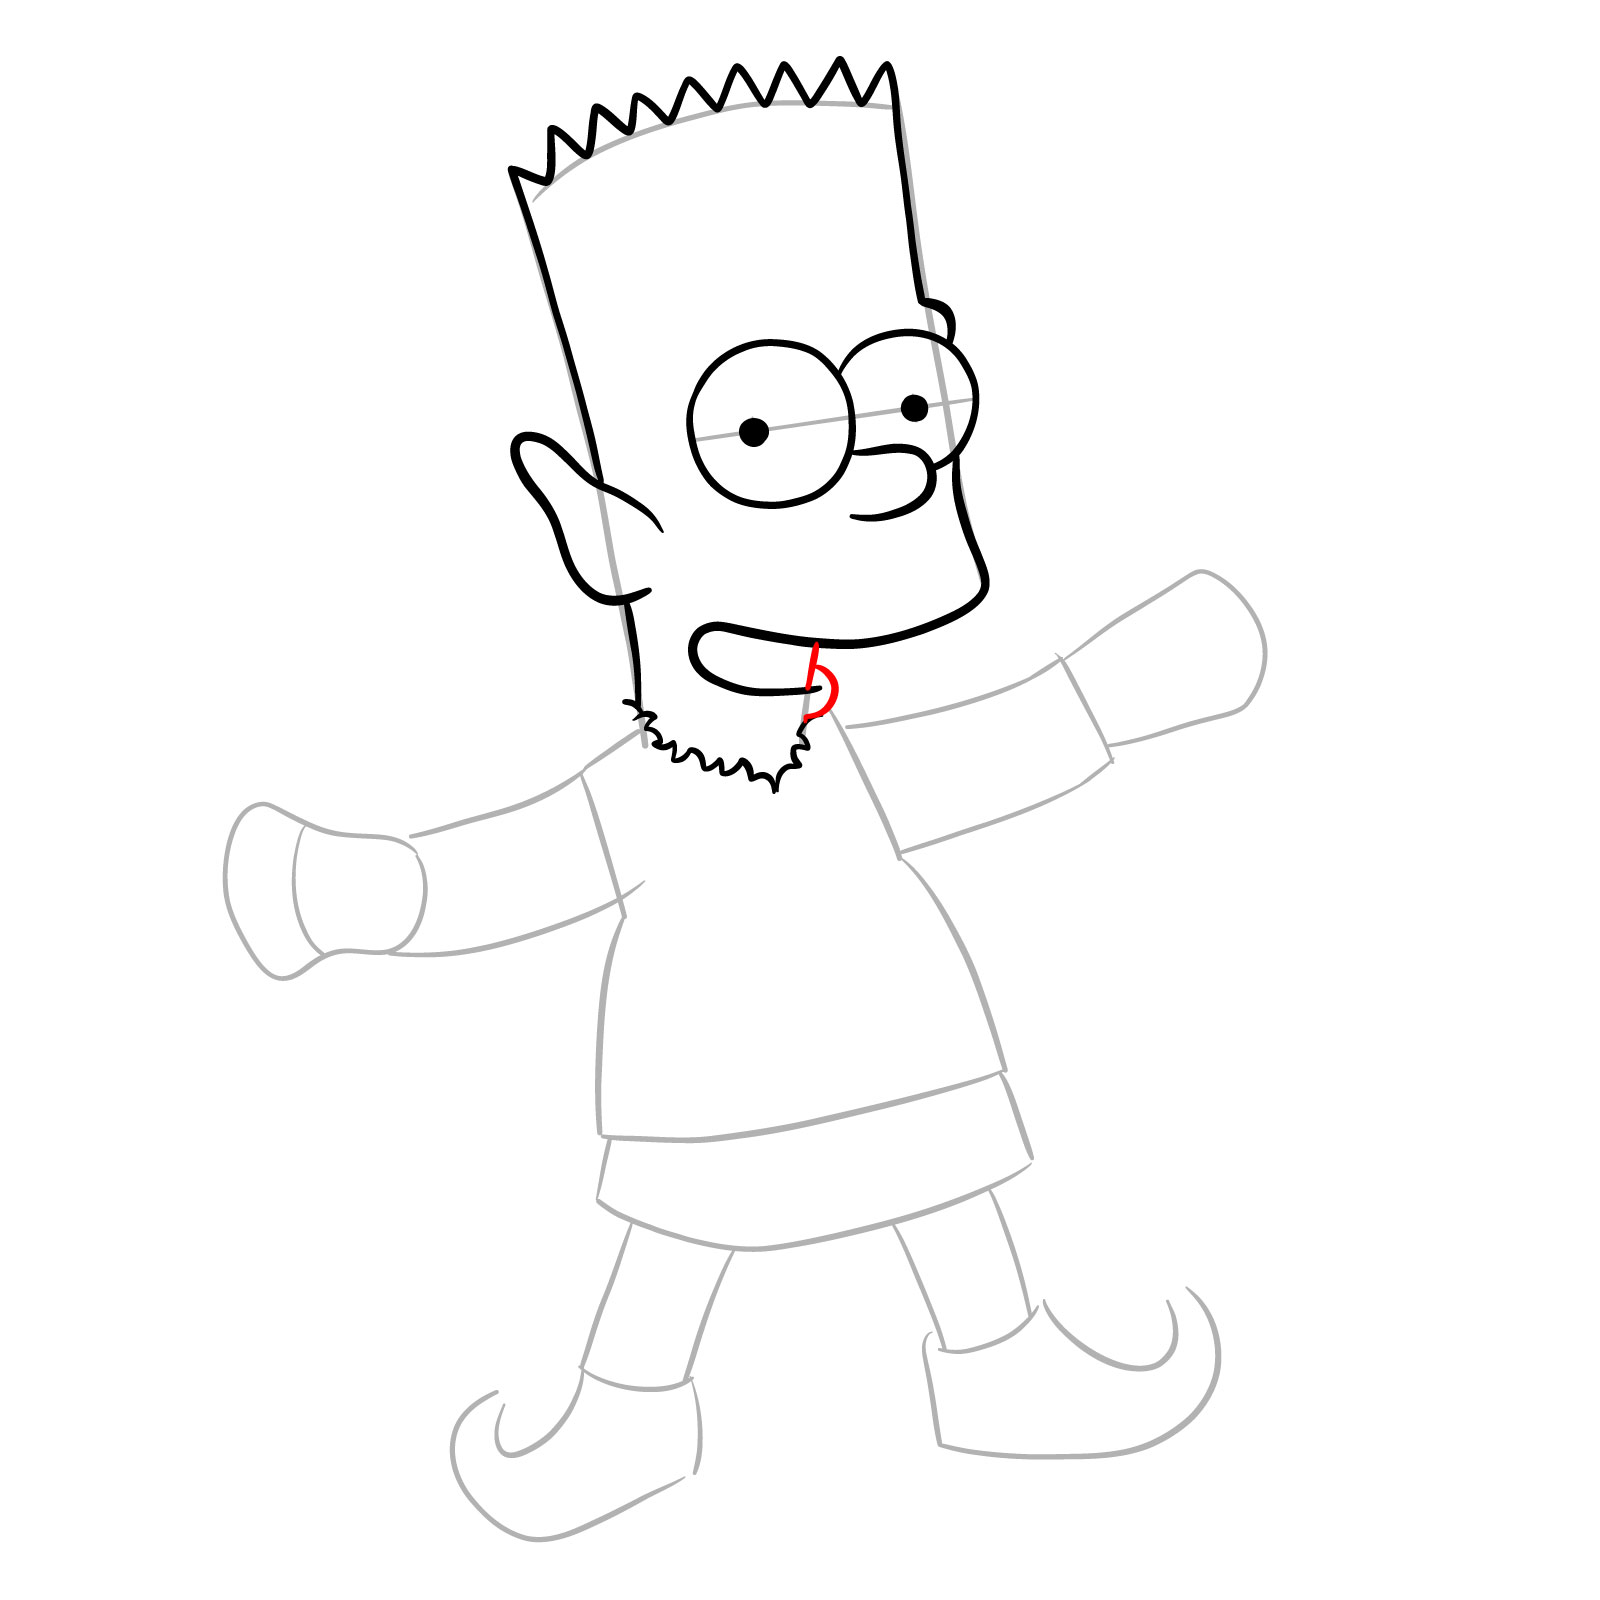 How to draw Bart Simpson as a Christmas Elf - step 12